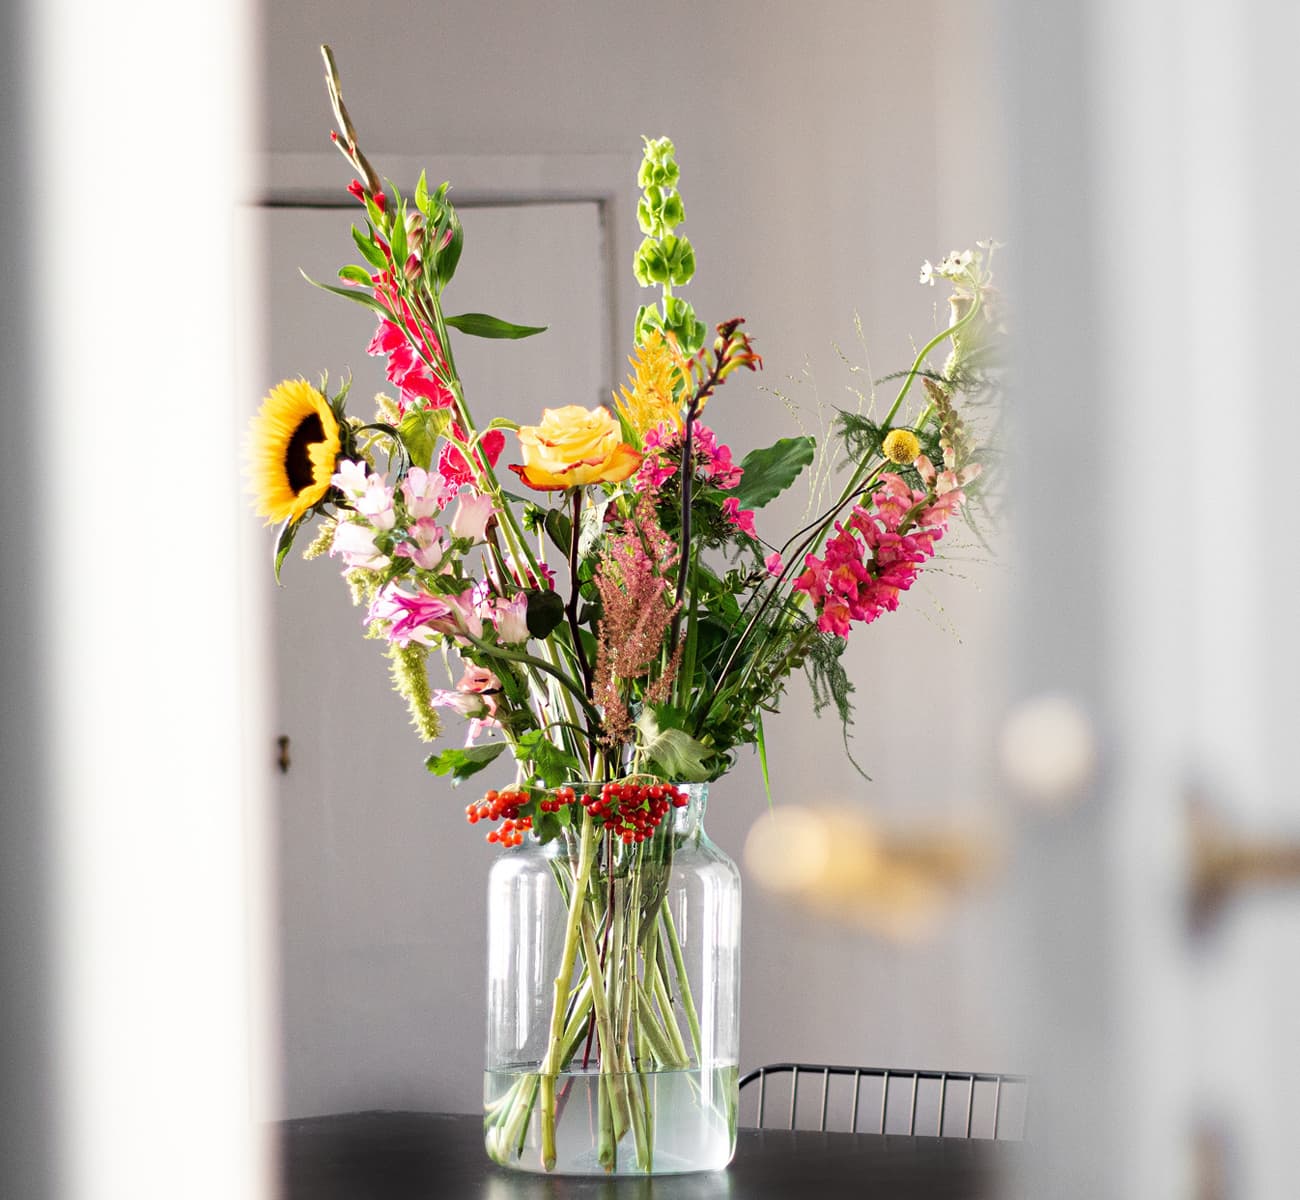 A big glass vase in a bright space holds a colourful DIY flower arrangement.